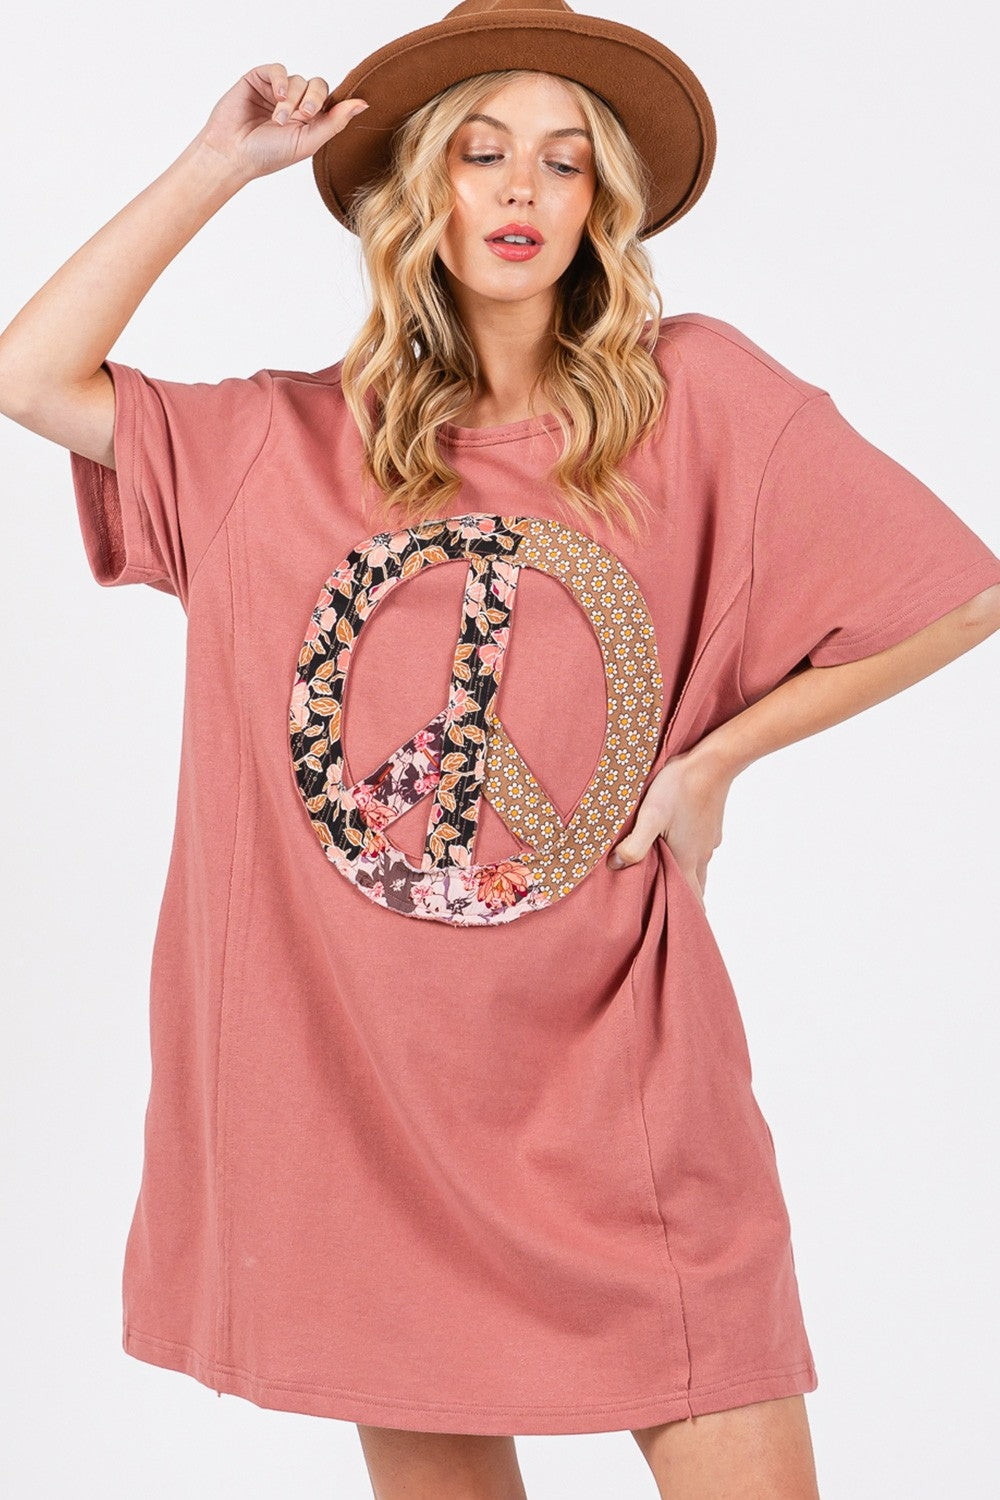 Sunset Vacation Plus Size Peace Sign Applique Short Sleeve Tee Dress Sunset and Swim Indian Red S 